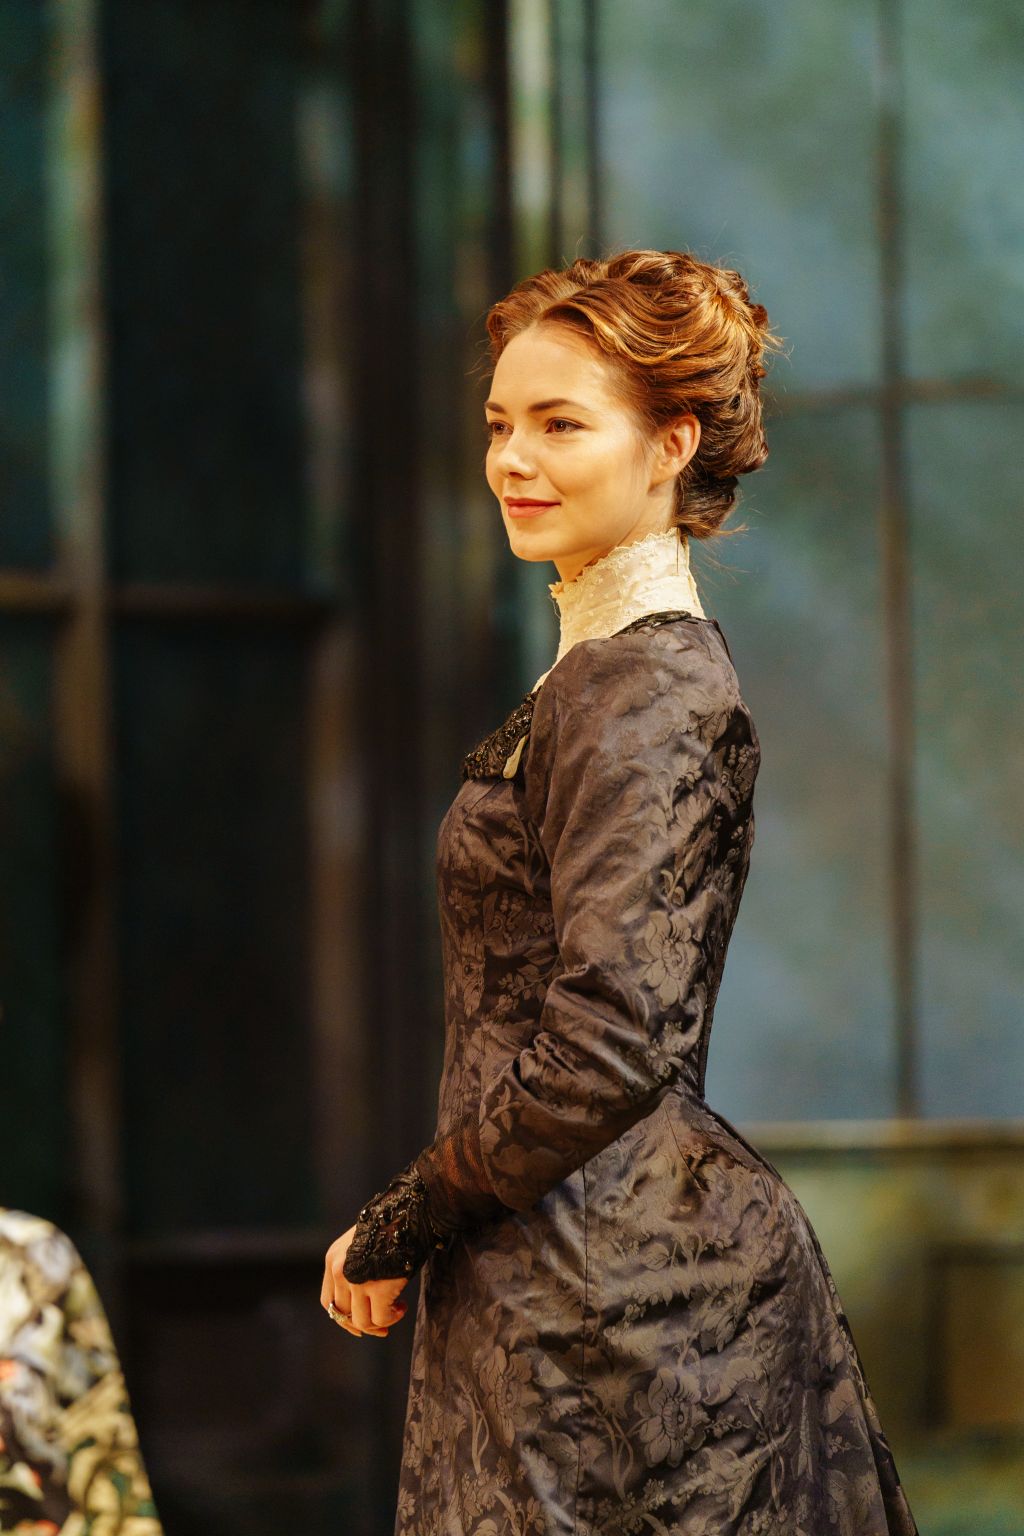 Kara Tointon as Olivia in 'Twelfth Night' for the RSC